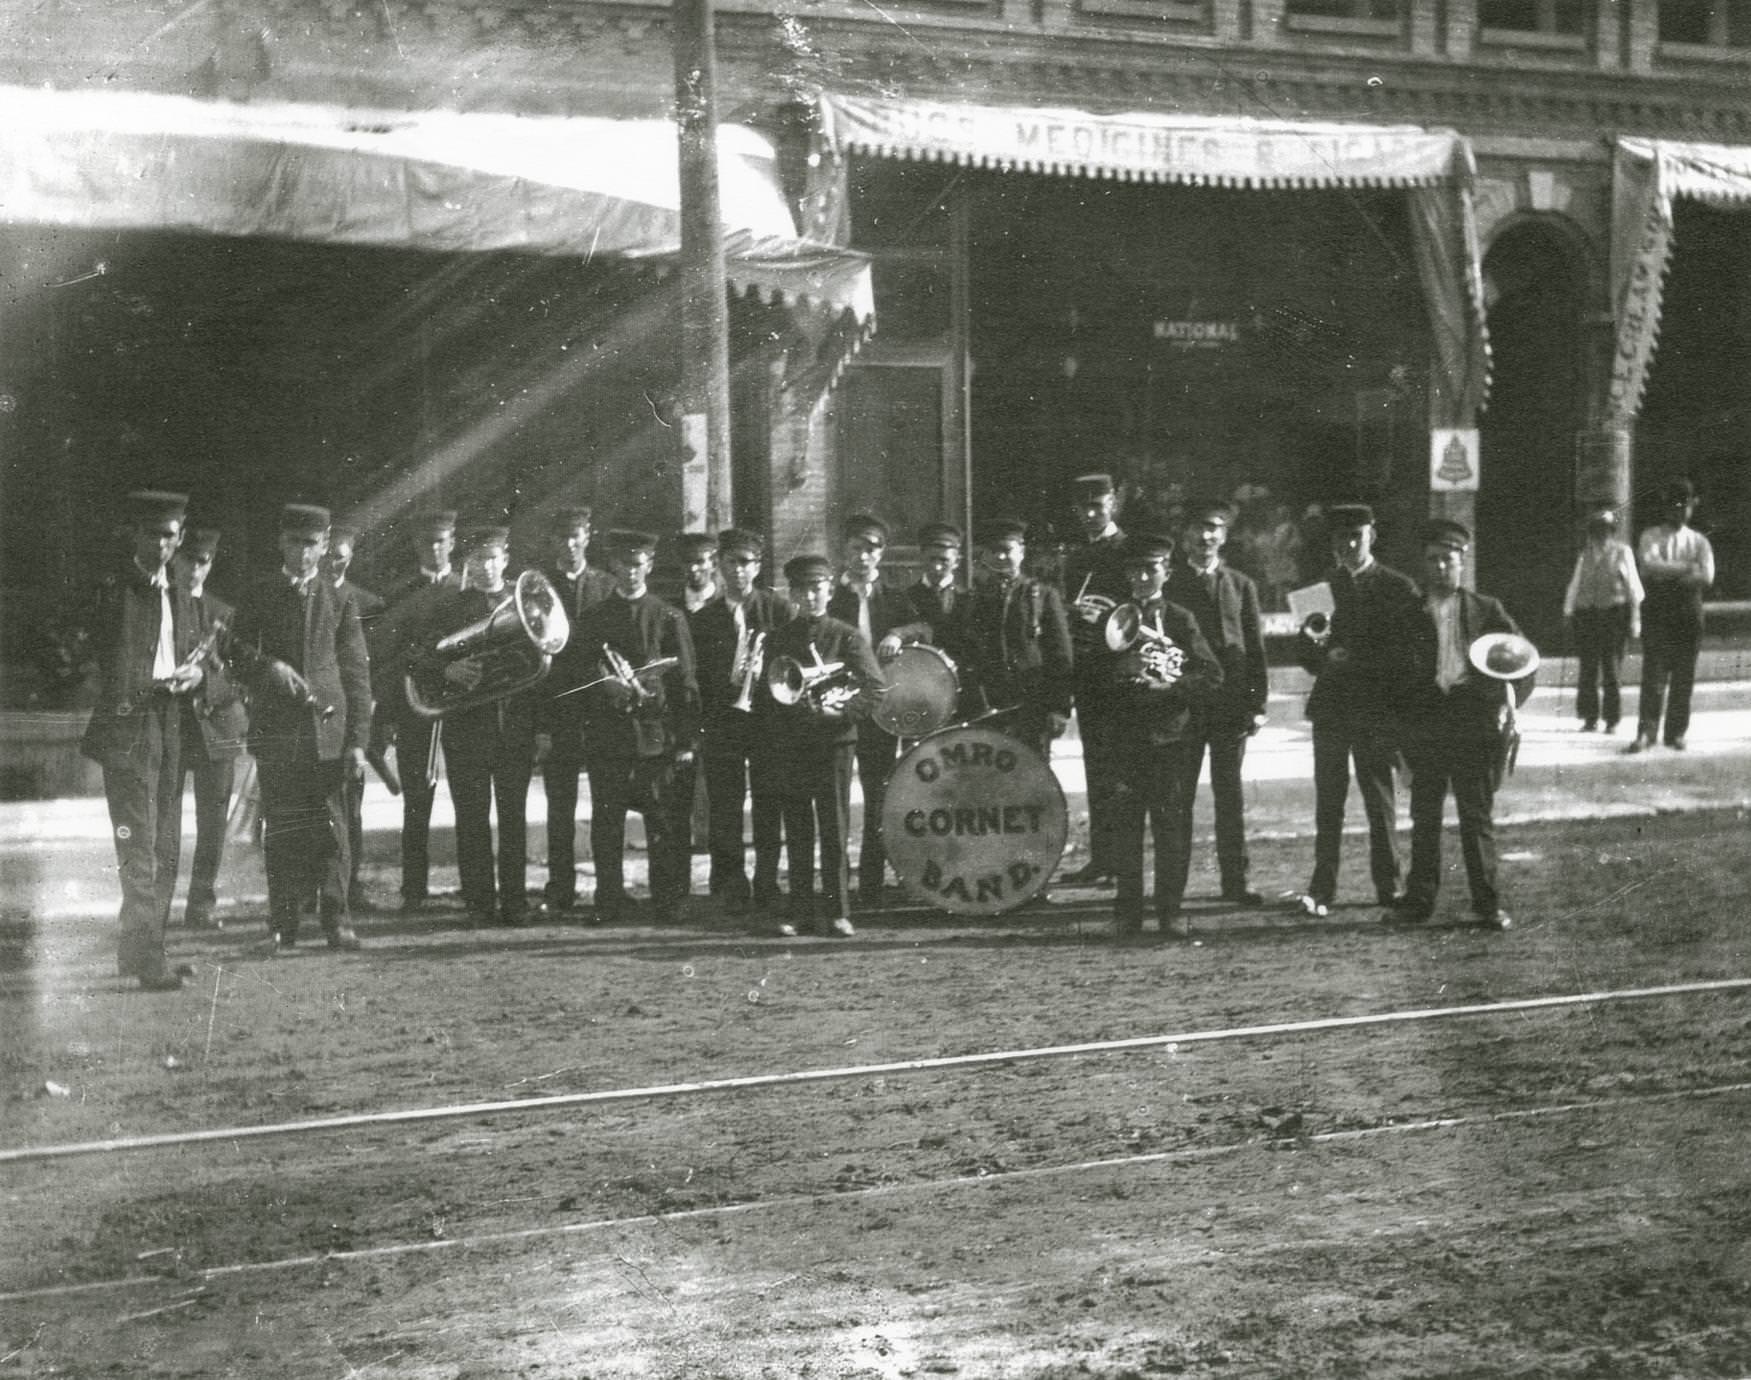 The Omro Cornet Band musters on Main Street, 1890